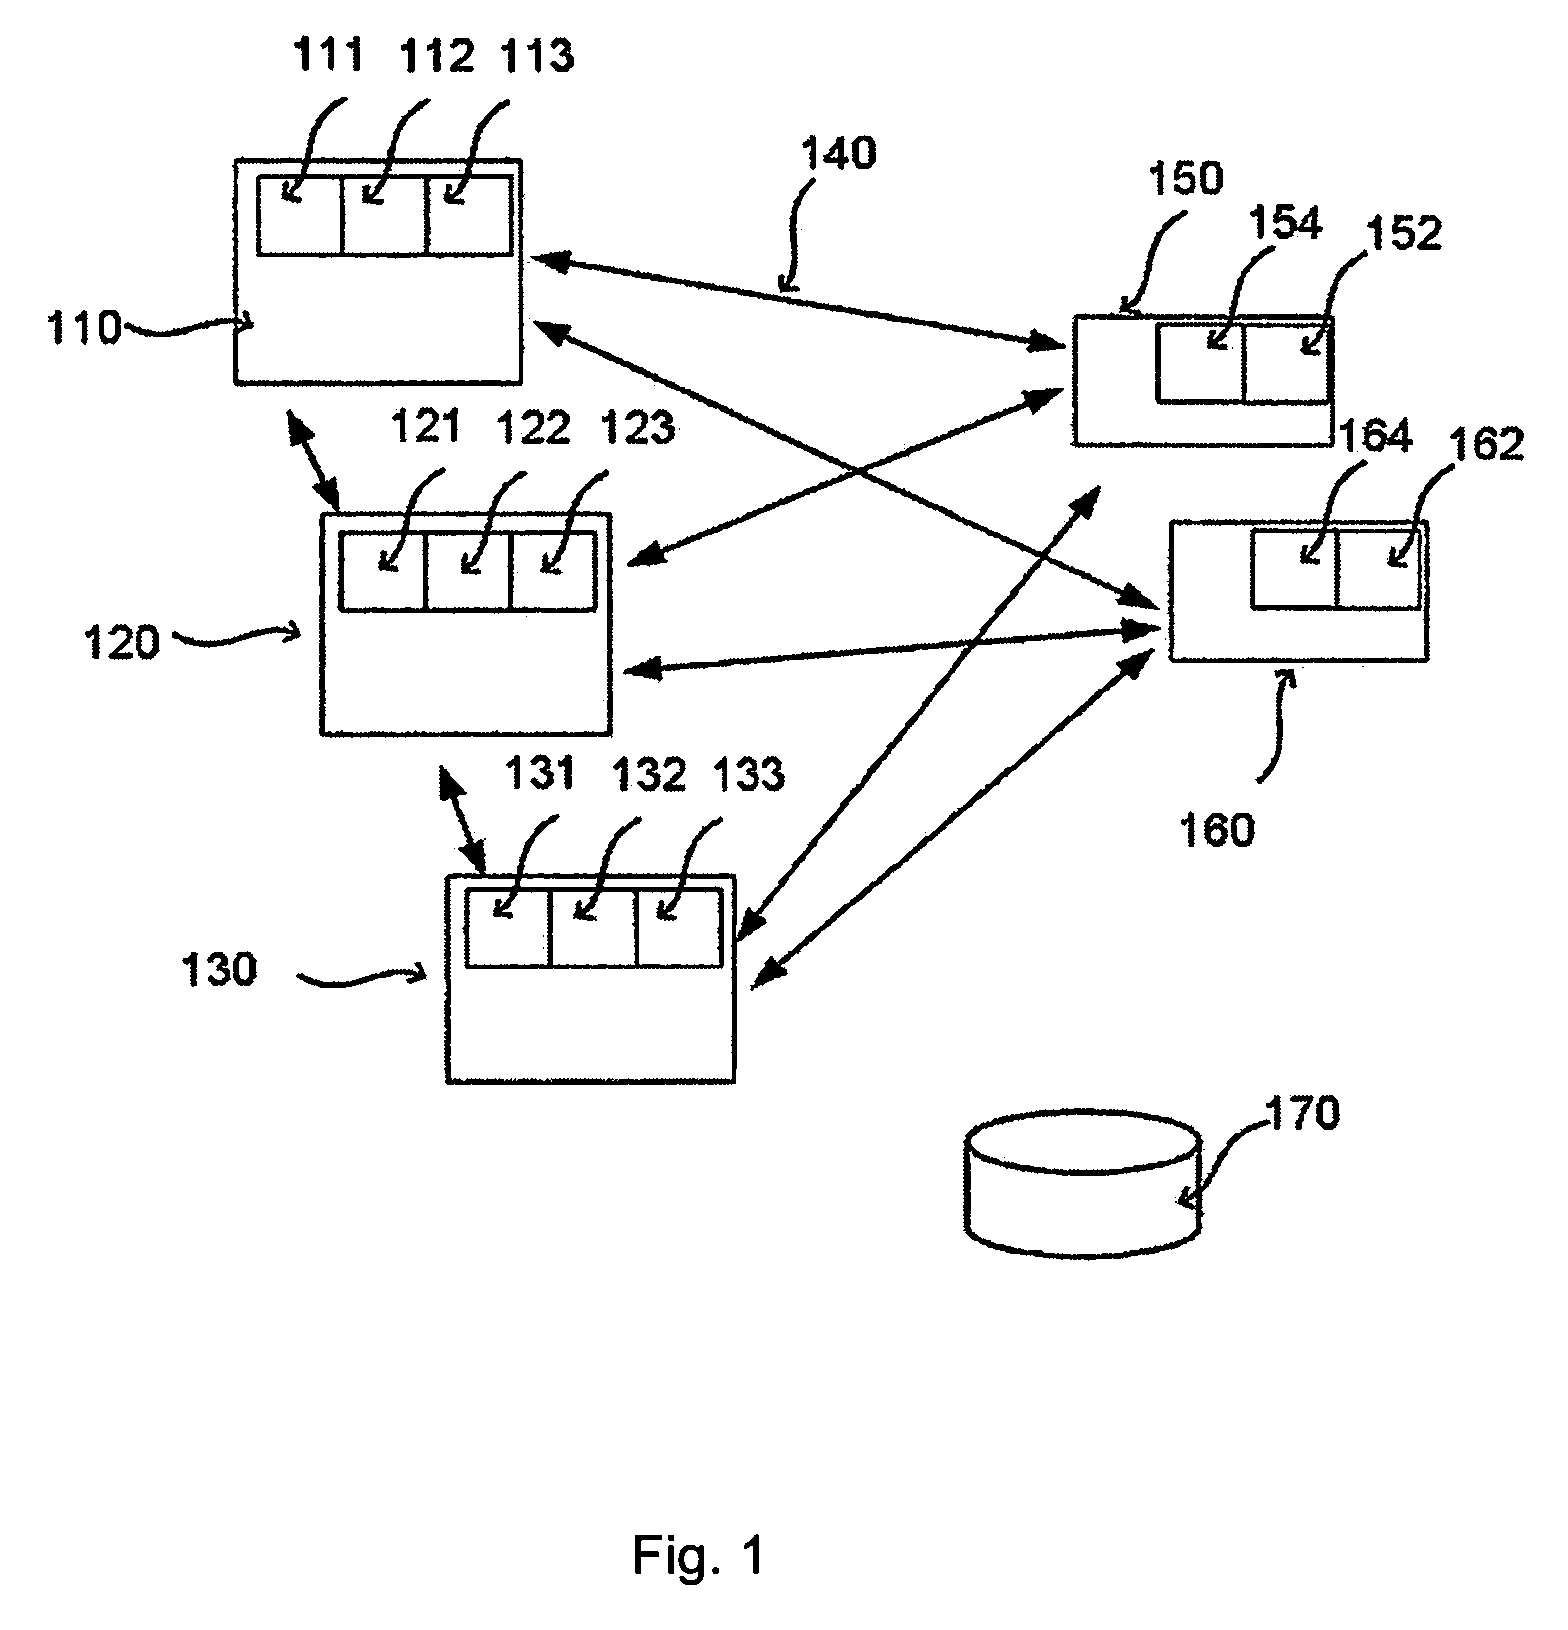 Surveying systems and methods